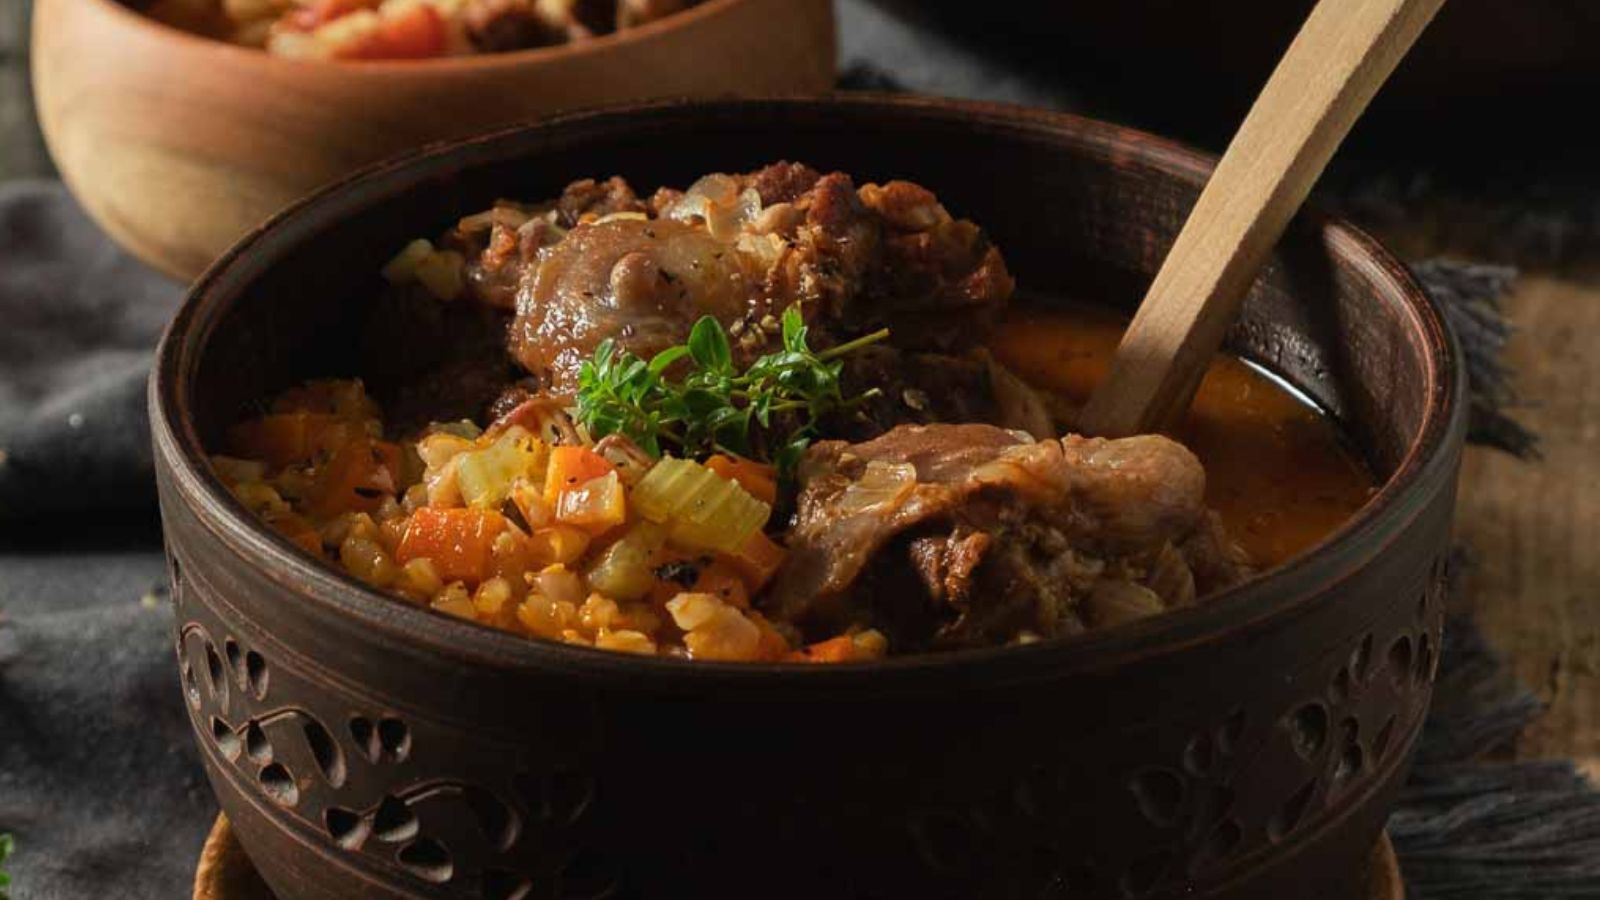 A bowl of oxtail soup with barley and vegetables.